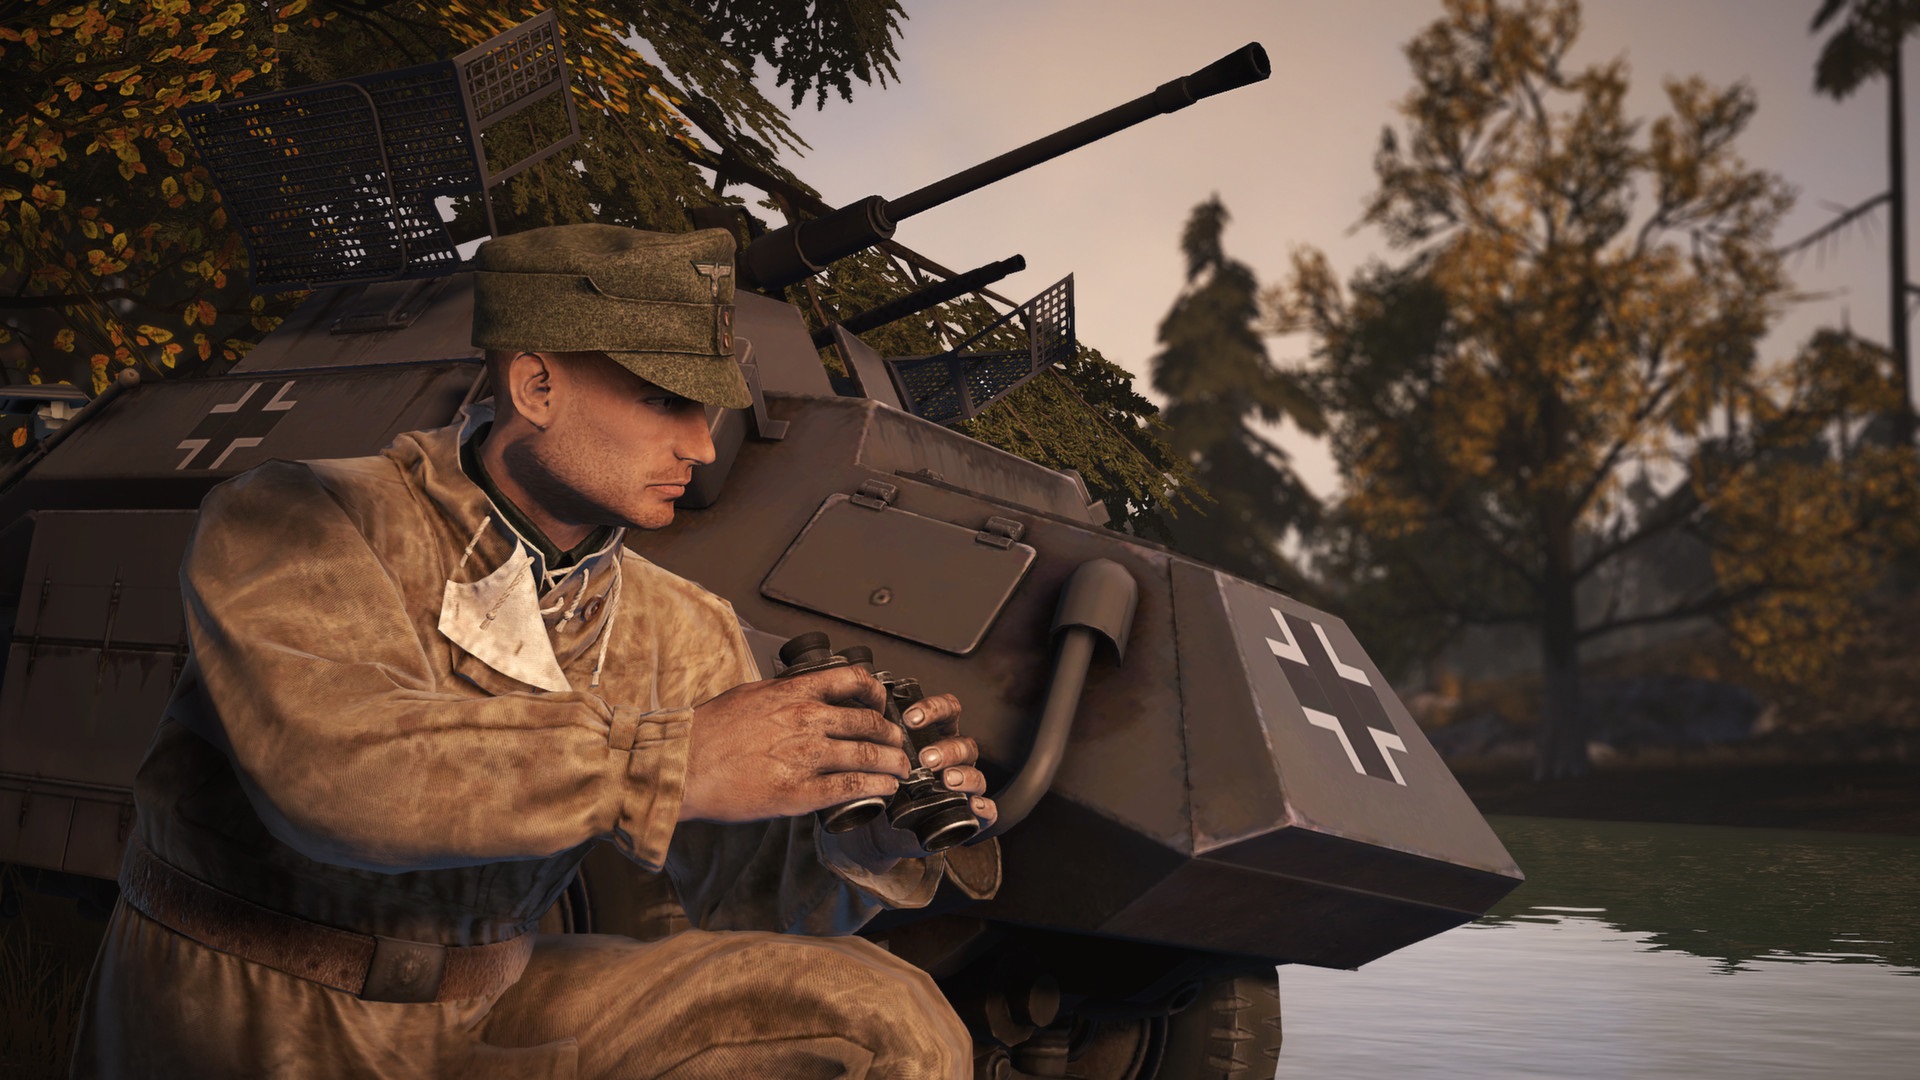 Best tank games: Heroes and Generals. Image shows a soldier crouching beside a tank.